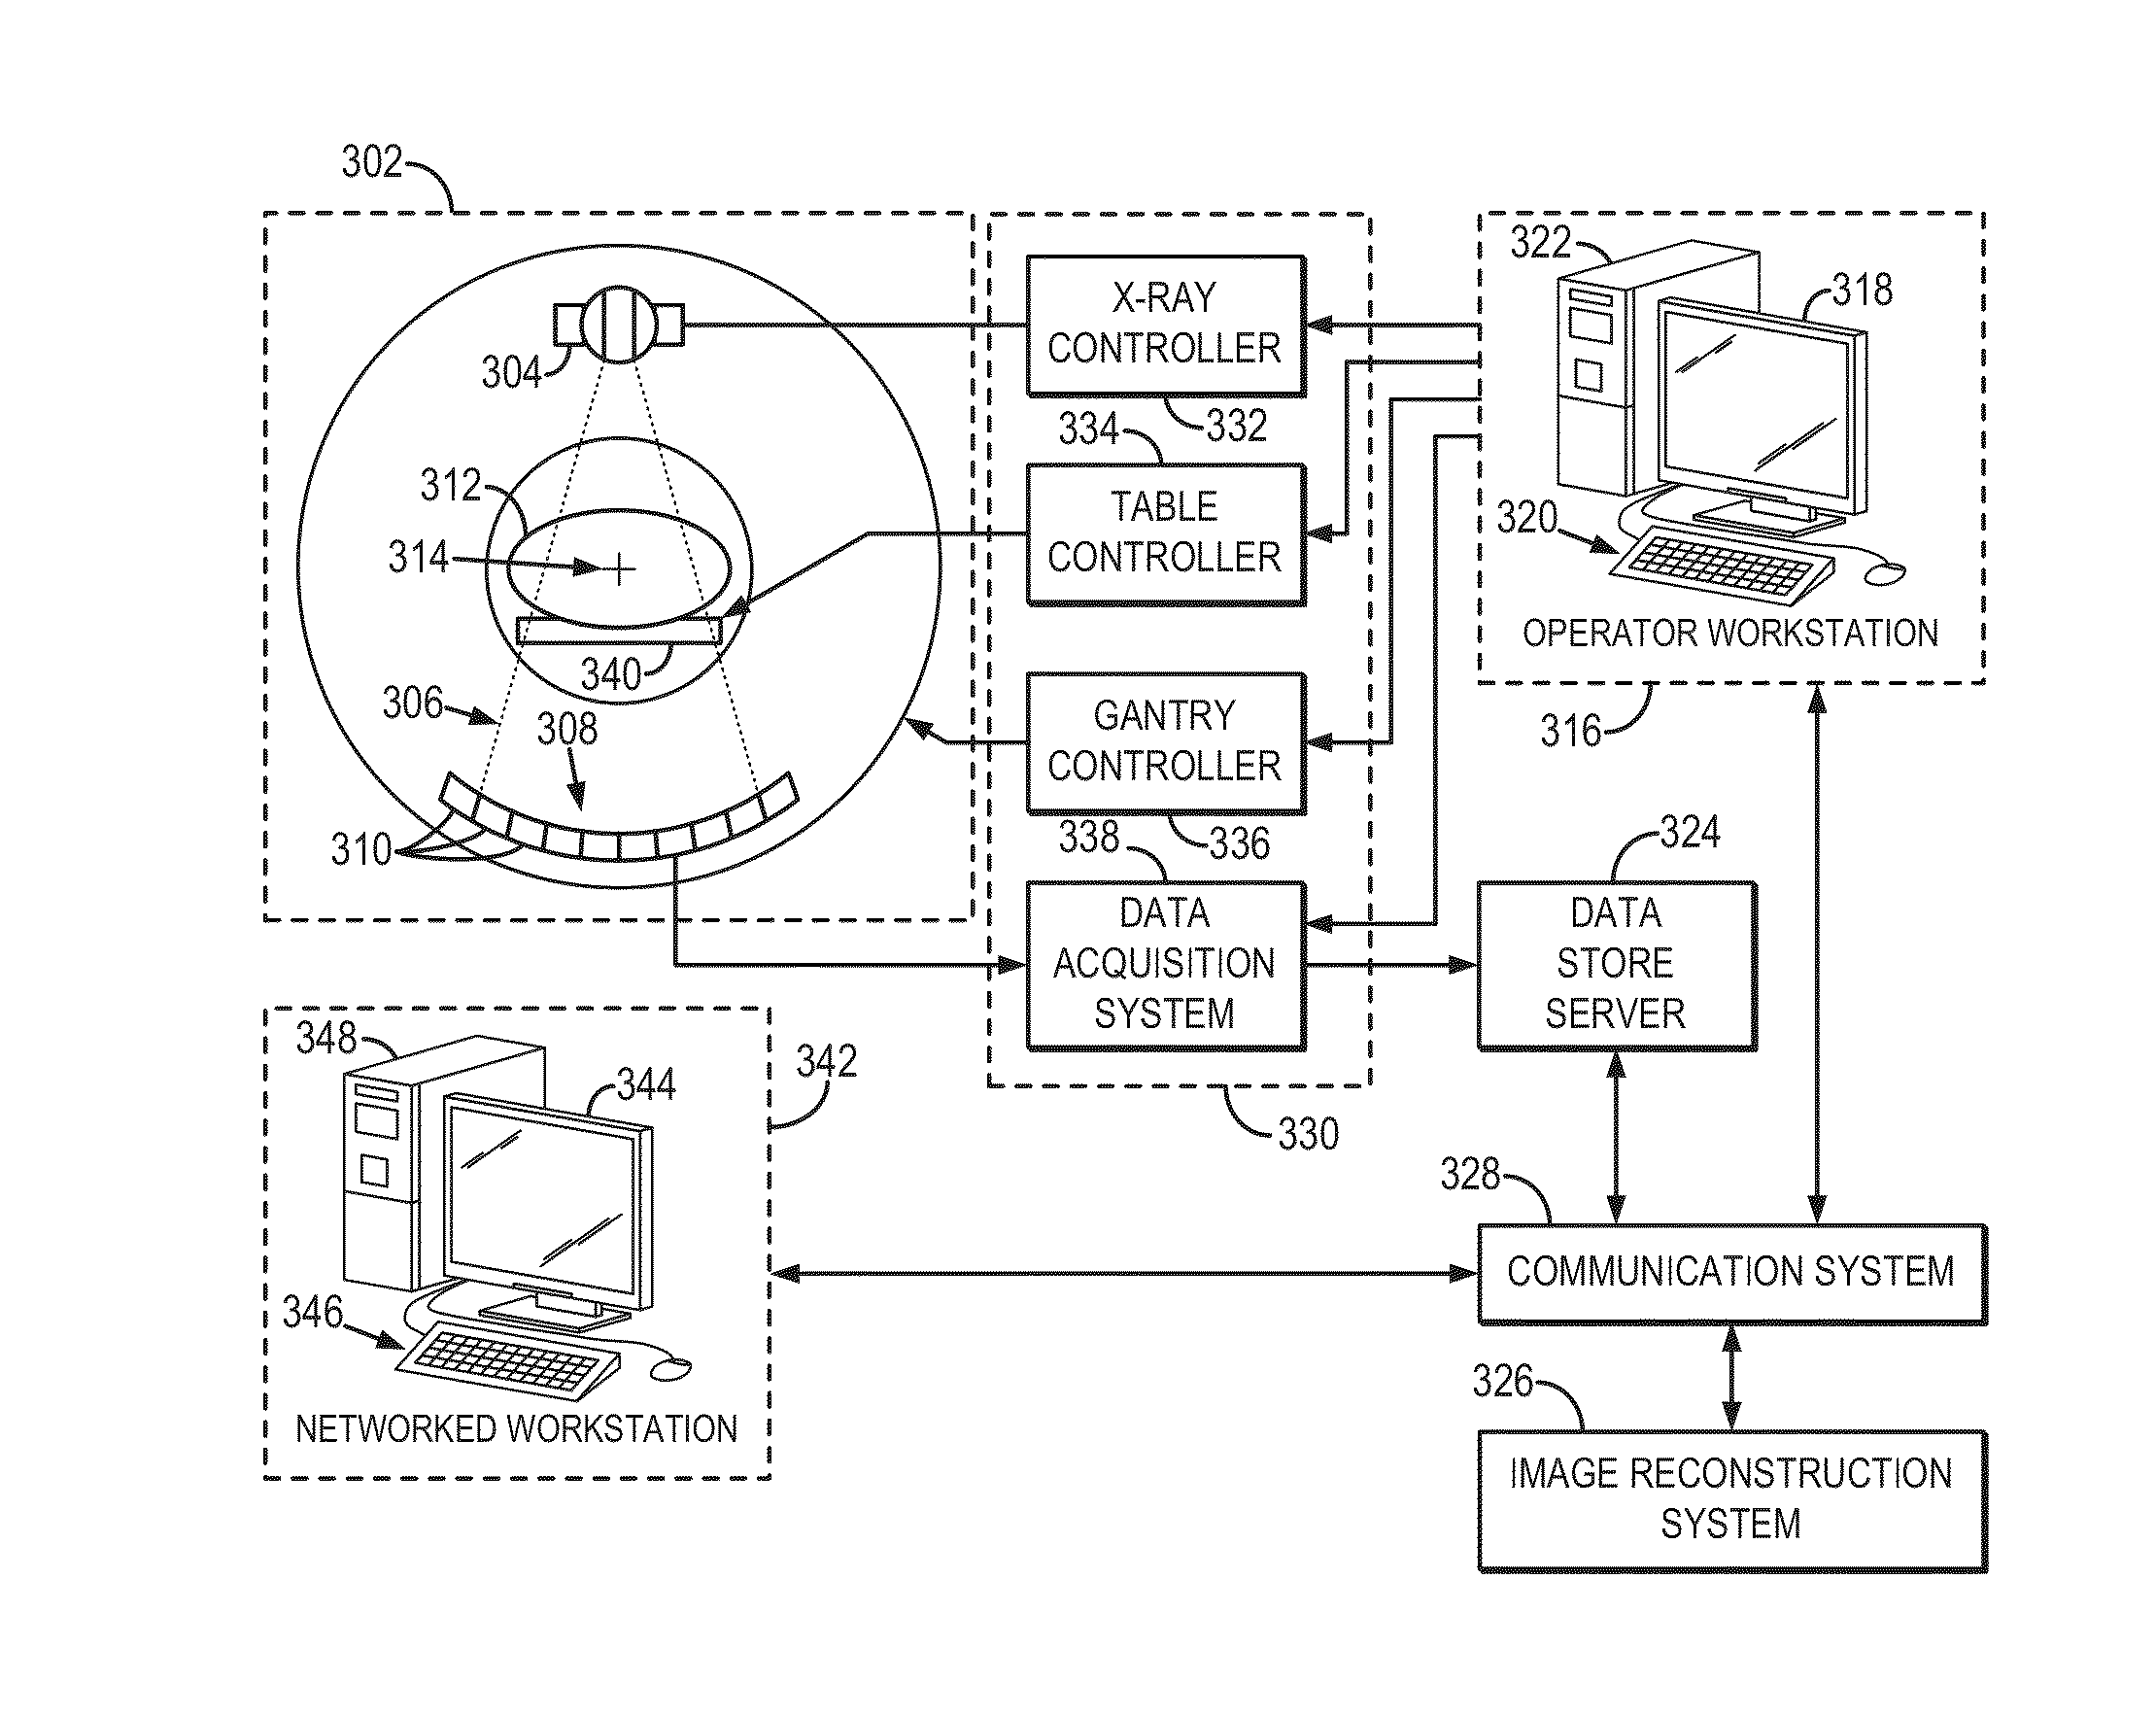 Systems And Methods For Noninvasive Spectral-Spatiotemporal Imaging of Cardiac Electrical Activity